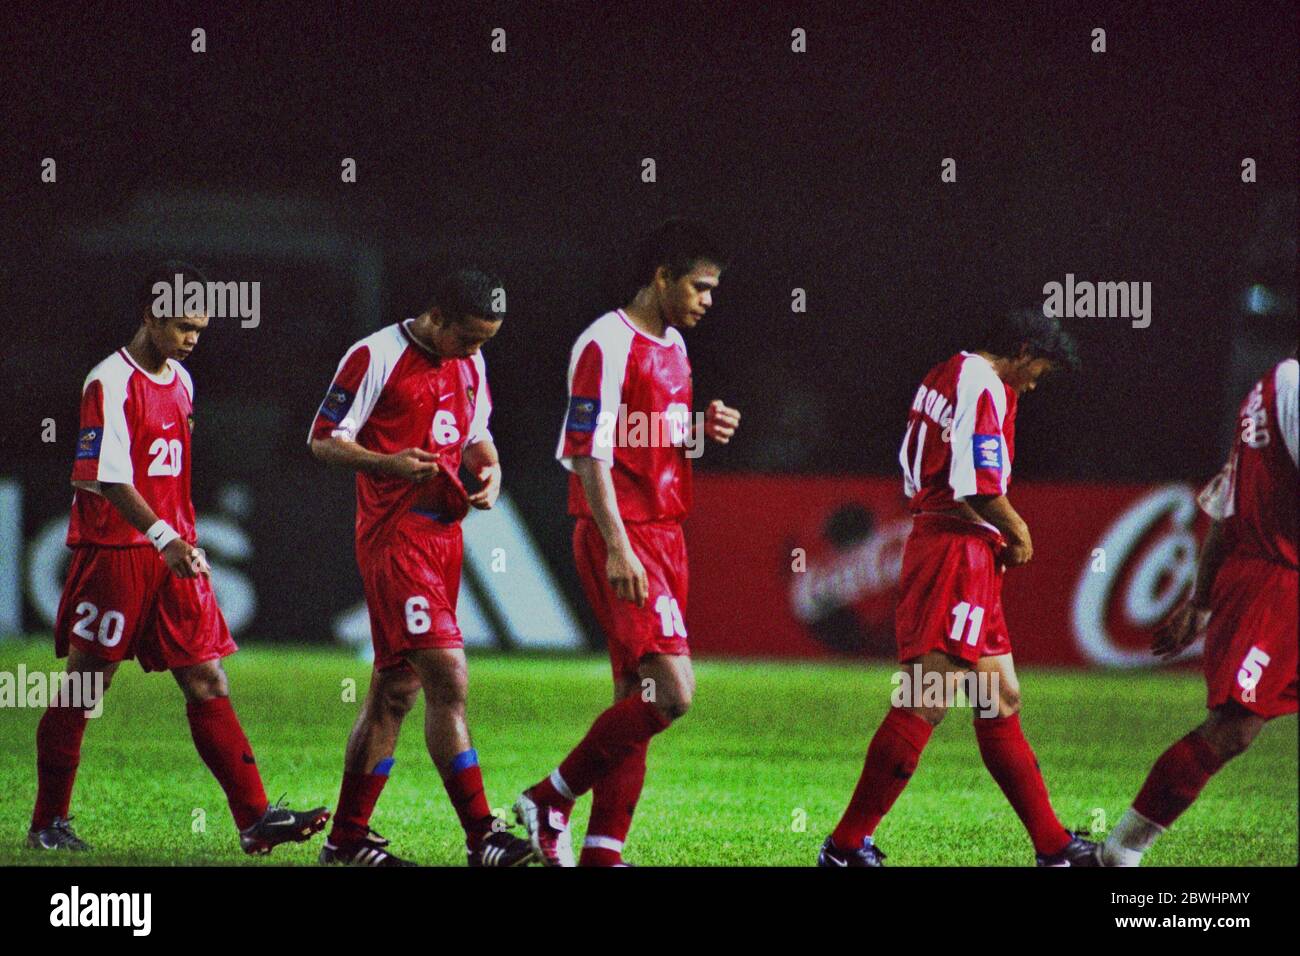 Players of Indonesia national football team walking in a row for half-time break during the 2002 Tiger Cup (2002 AFF Championship) group stage match against Vietnam in Gelora Bung Karno Stadium in Senayan, Jakarta, Indonesia. Archival photo. December 21st, 2002. Full-Time: Indonesia 2-2 Vietnam. Stock Photo